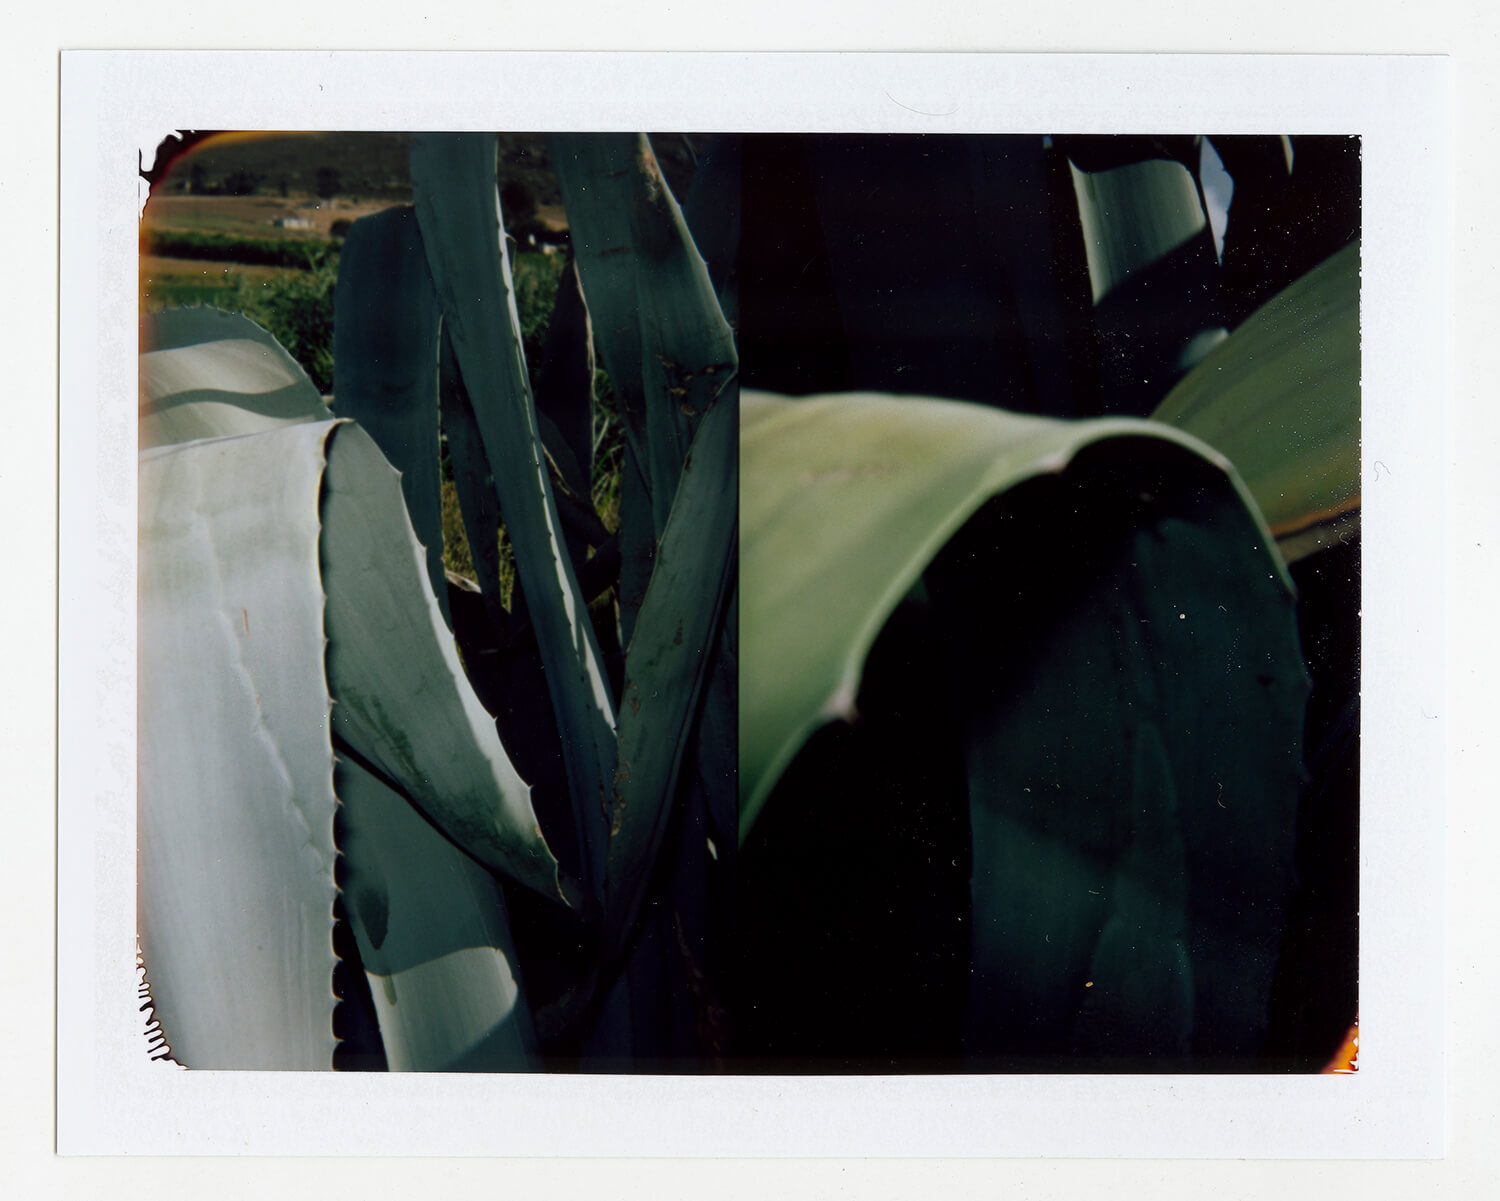  I.D.066, The Polaroid Revolutionary Workers, 2013, Polaroid Picture, 107mm x 86mm 